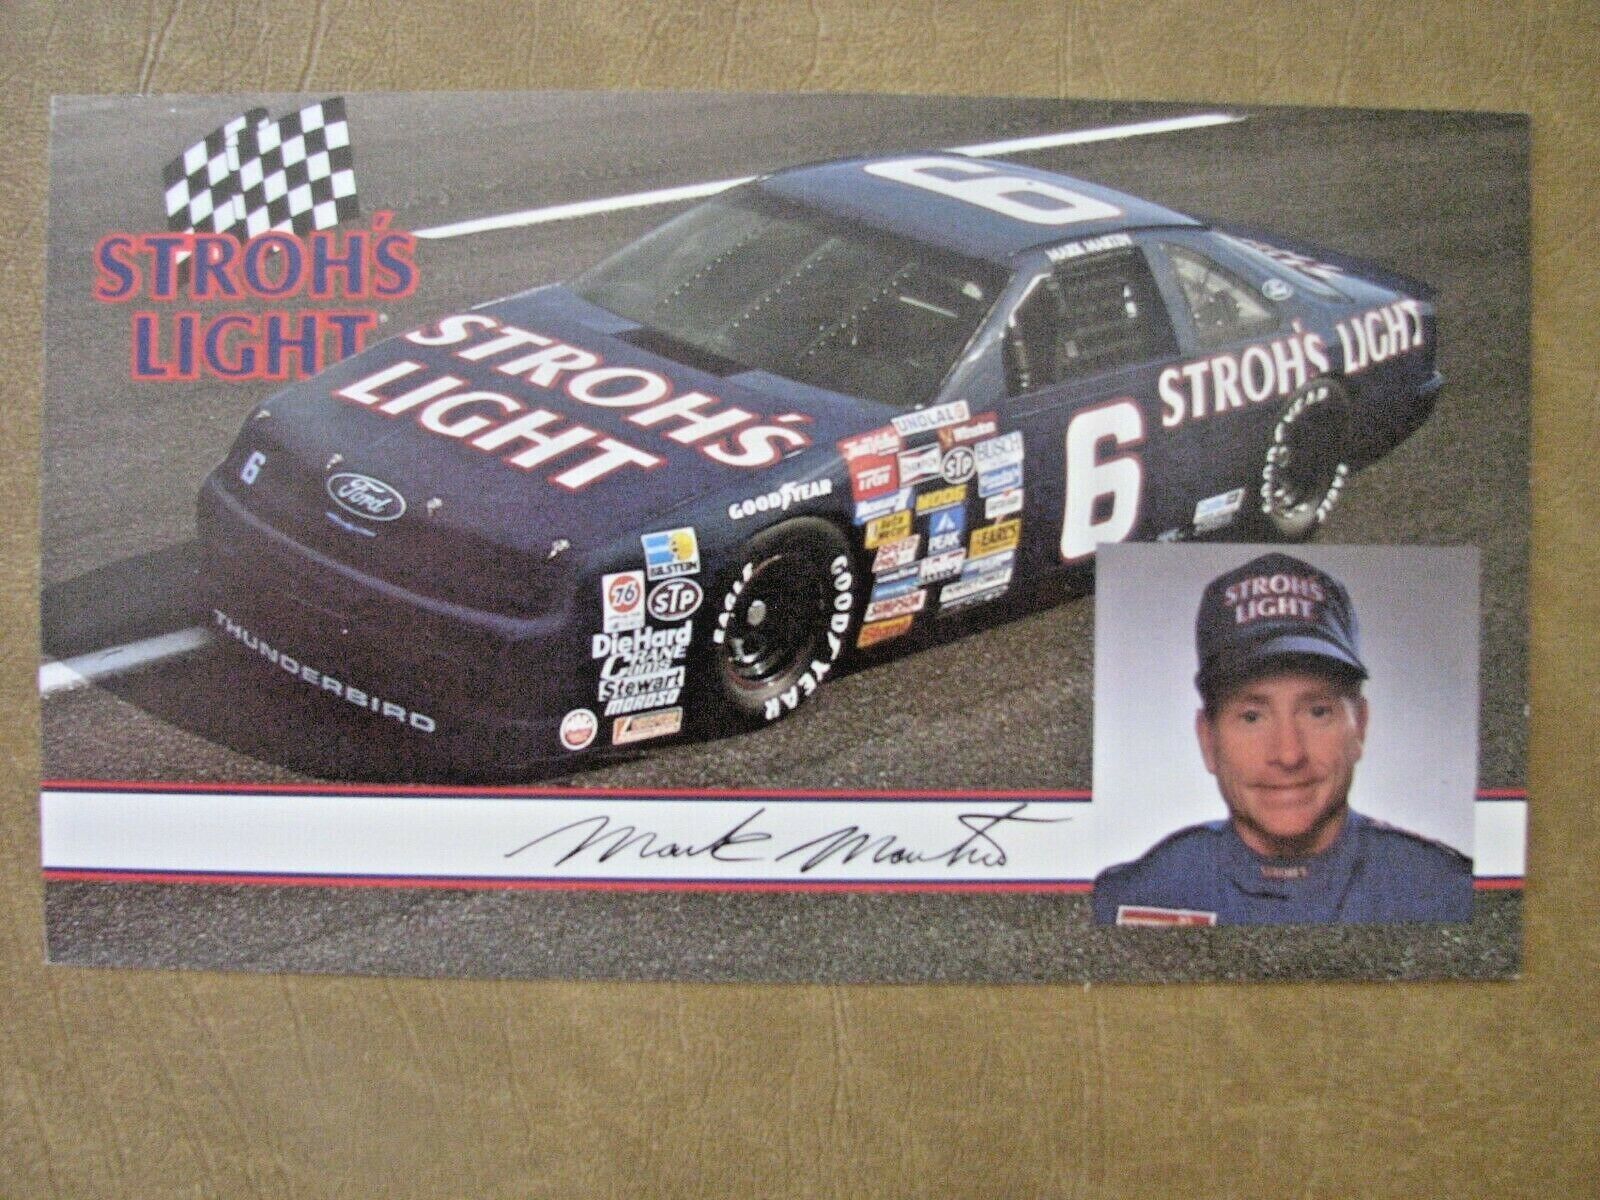 1989 Stroh's Mark Martin #6 Racing Team Photo Card 2 Sided (6 ea in a set) $5.00 Без бренда